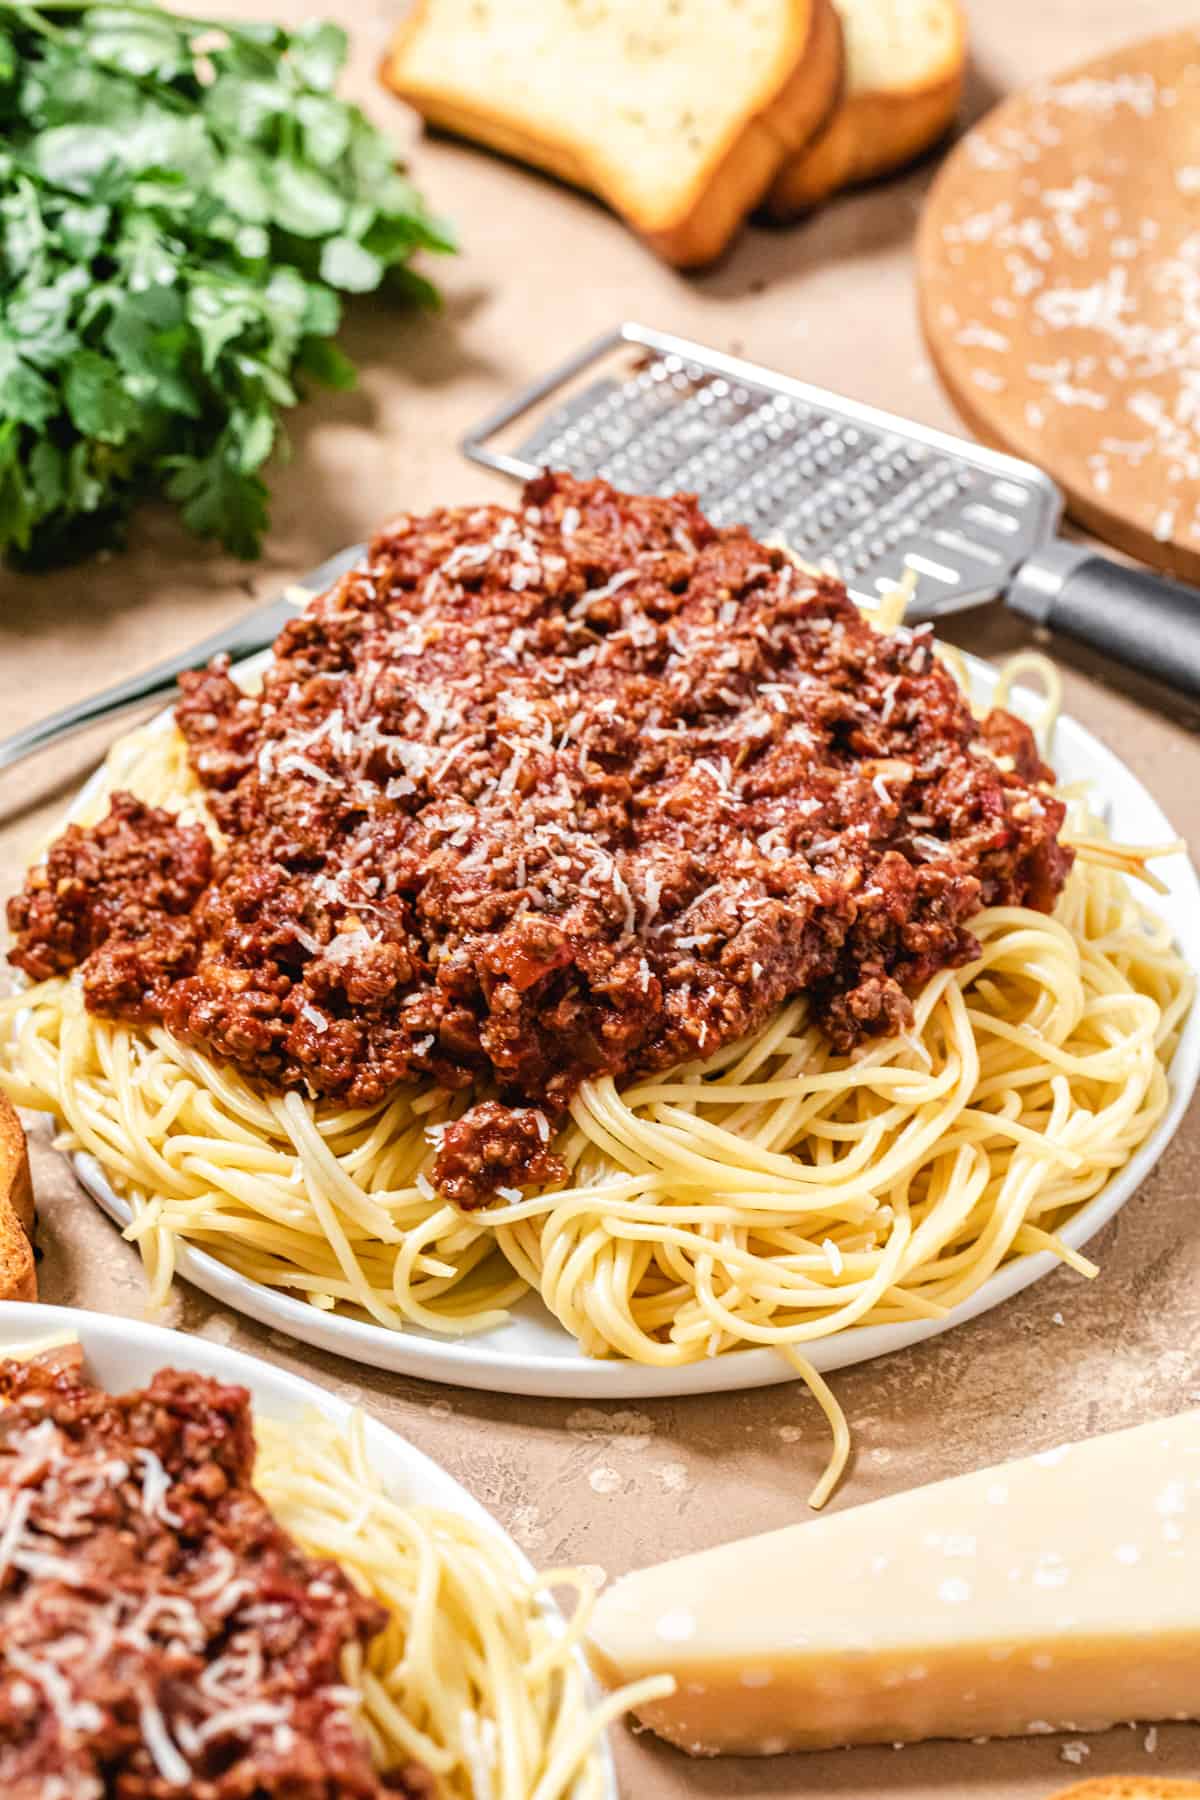 Spaghetti And Meat Sauce Outlet Sales, Save 65% | jlcatj.gob.mx